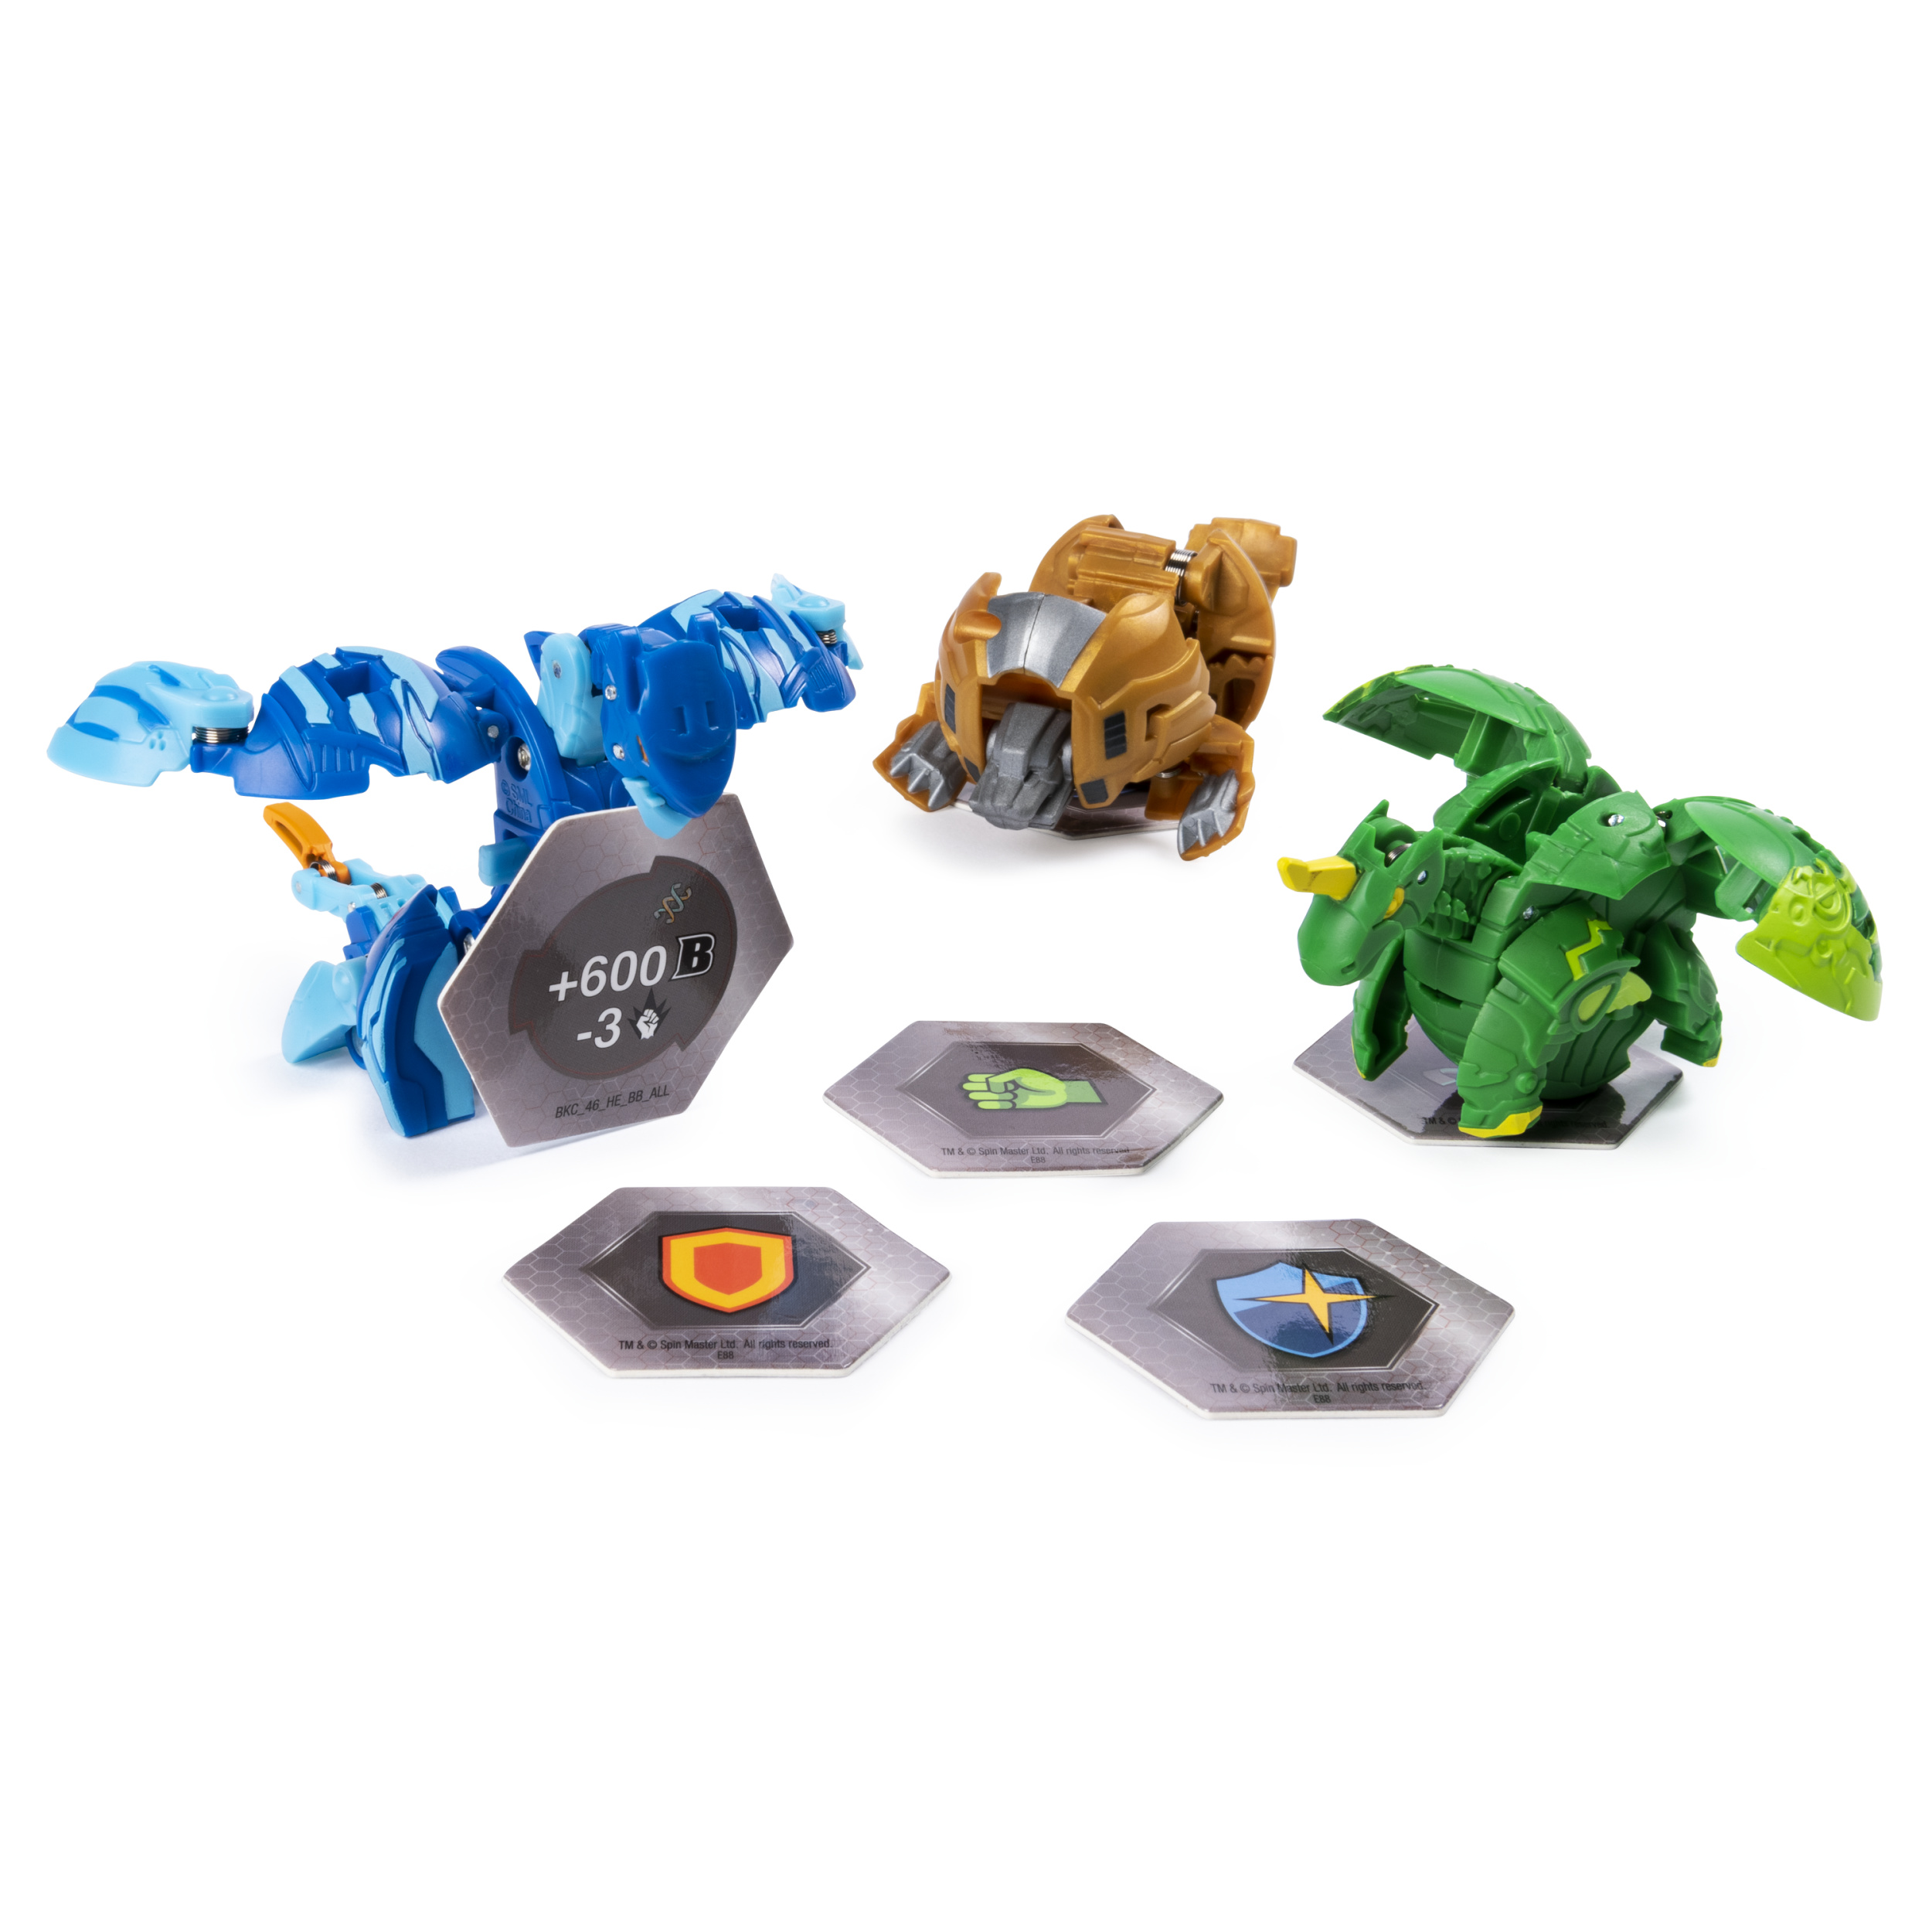 Bakugan Starter Pack 3-Pack, Serpenteze, Collectible Action Figures, for Ages 6 and Up - image 4 of 9